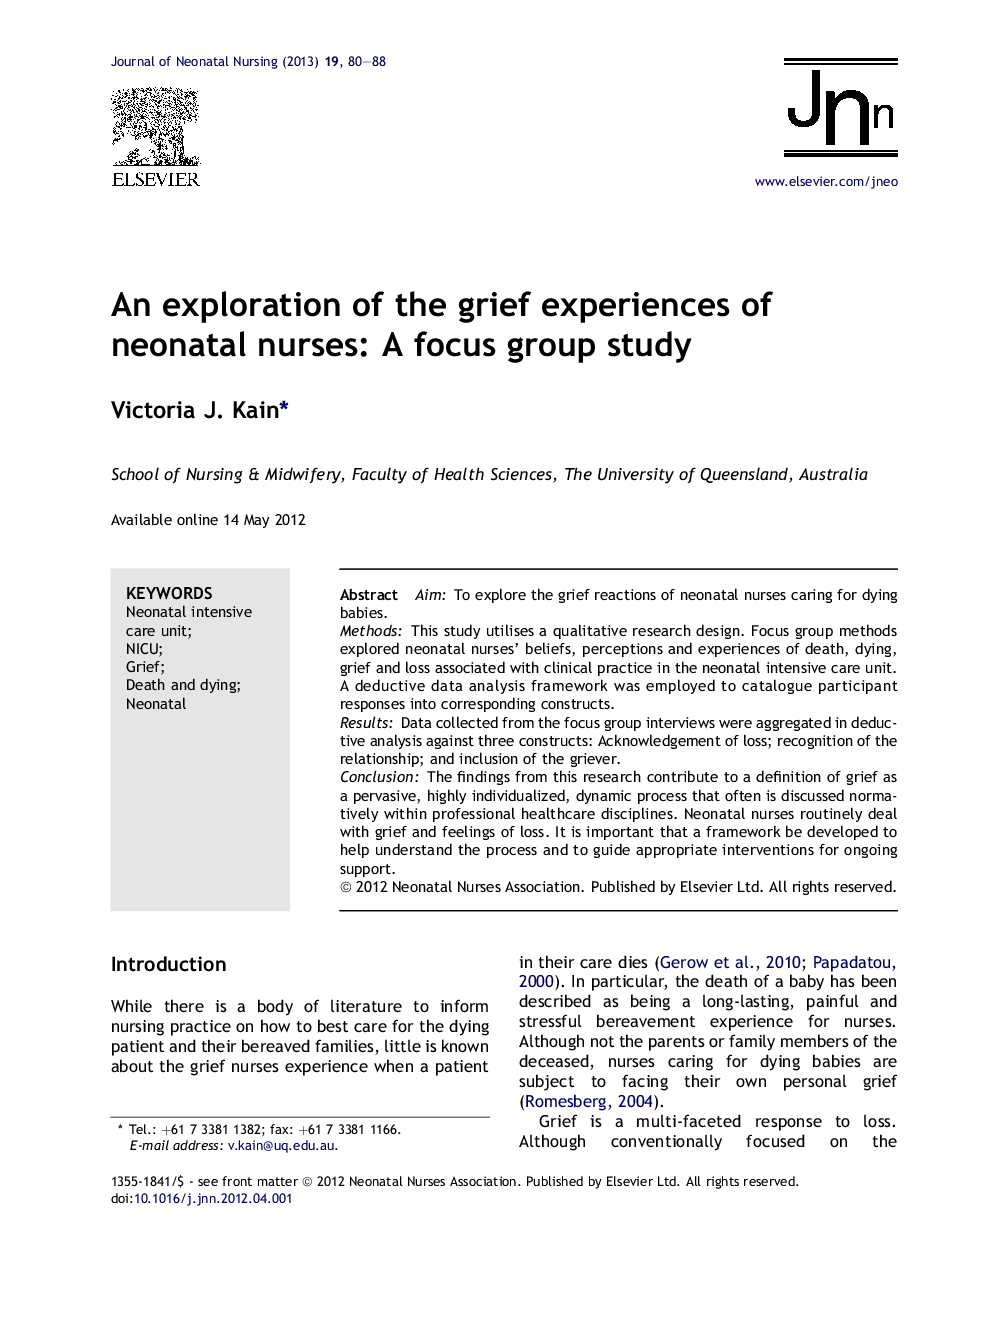 An exploration of the grief experiences of neonatal nurses: A focus group study